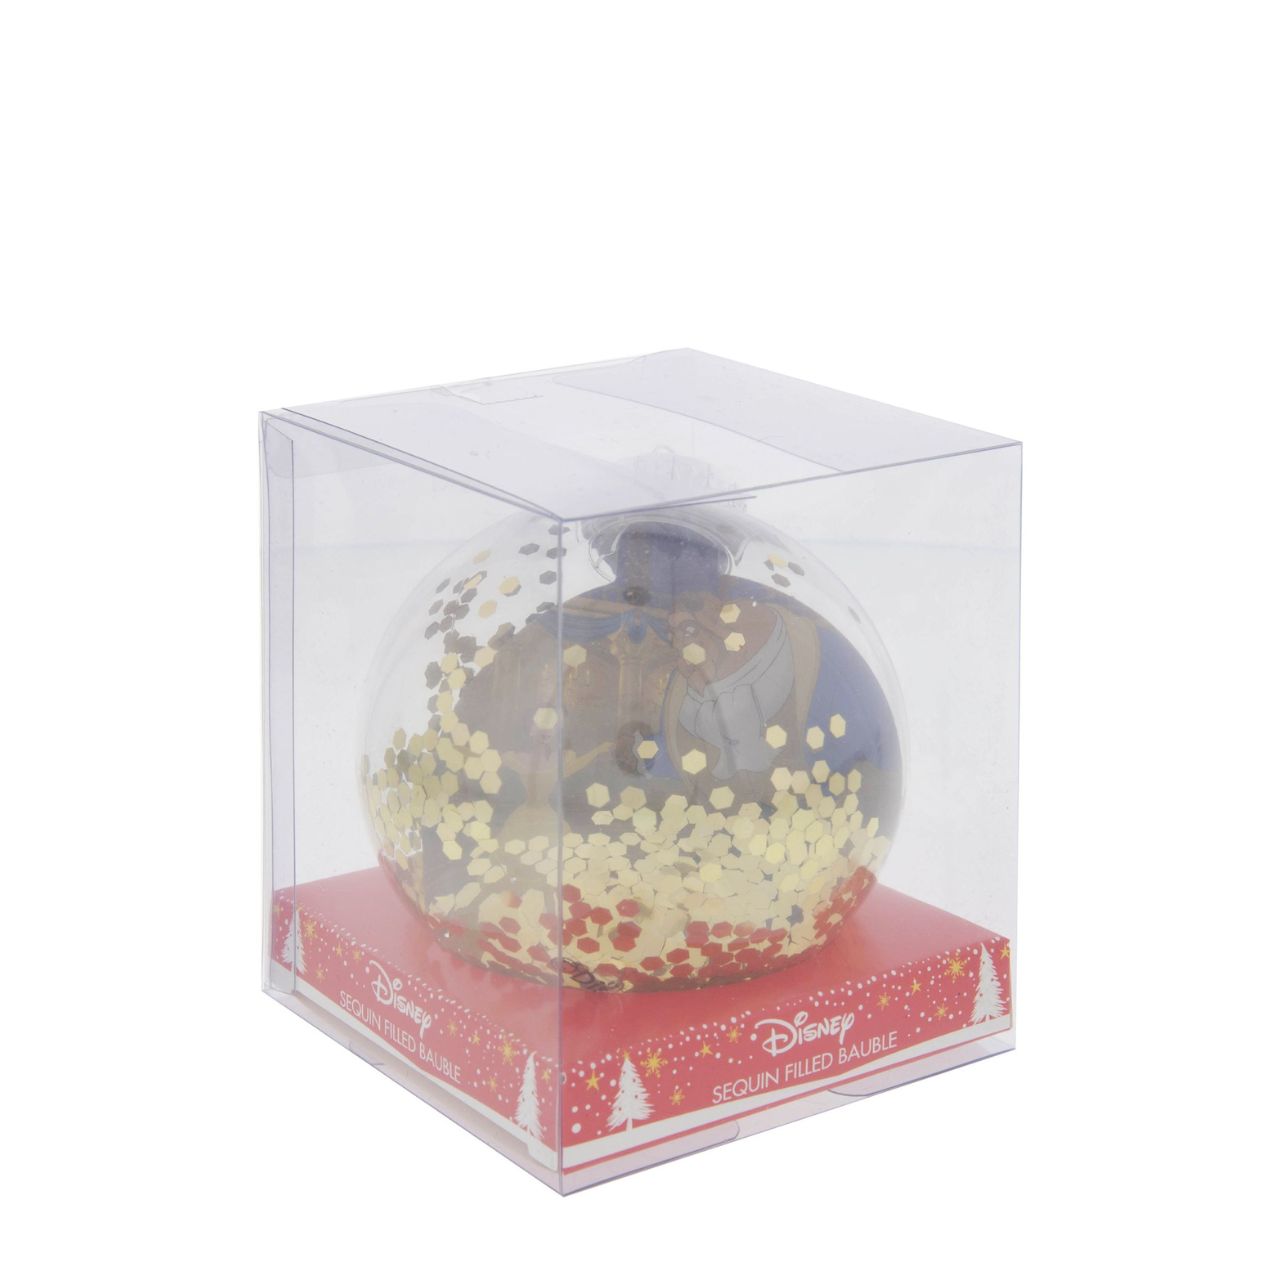 Beauty And The Beast Disney Sequin 2D Bauble  Bring the magic and glamour of the Disney princesses to the festivity with this wonderful 7.5cm gold Beauty and The Beast sequin bauble.